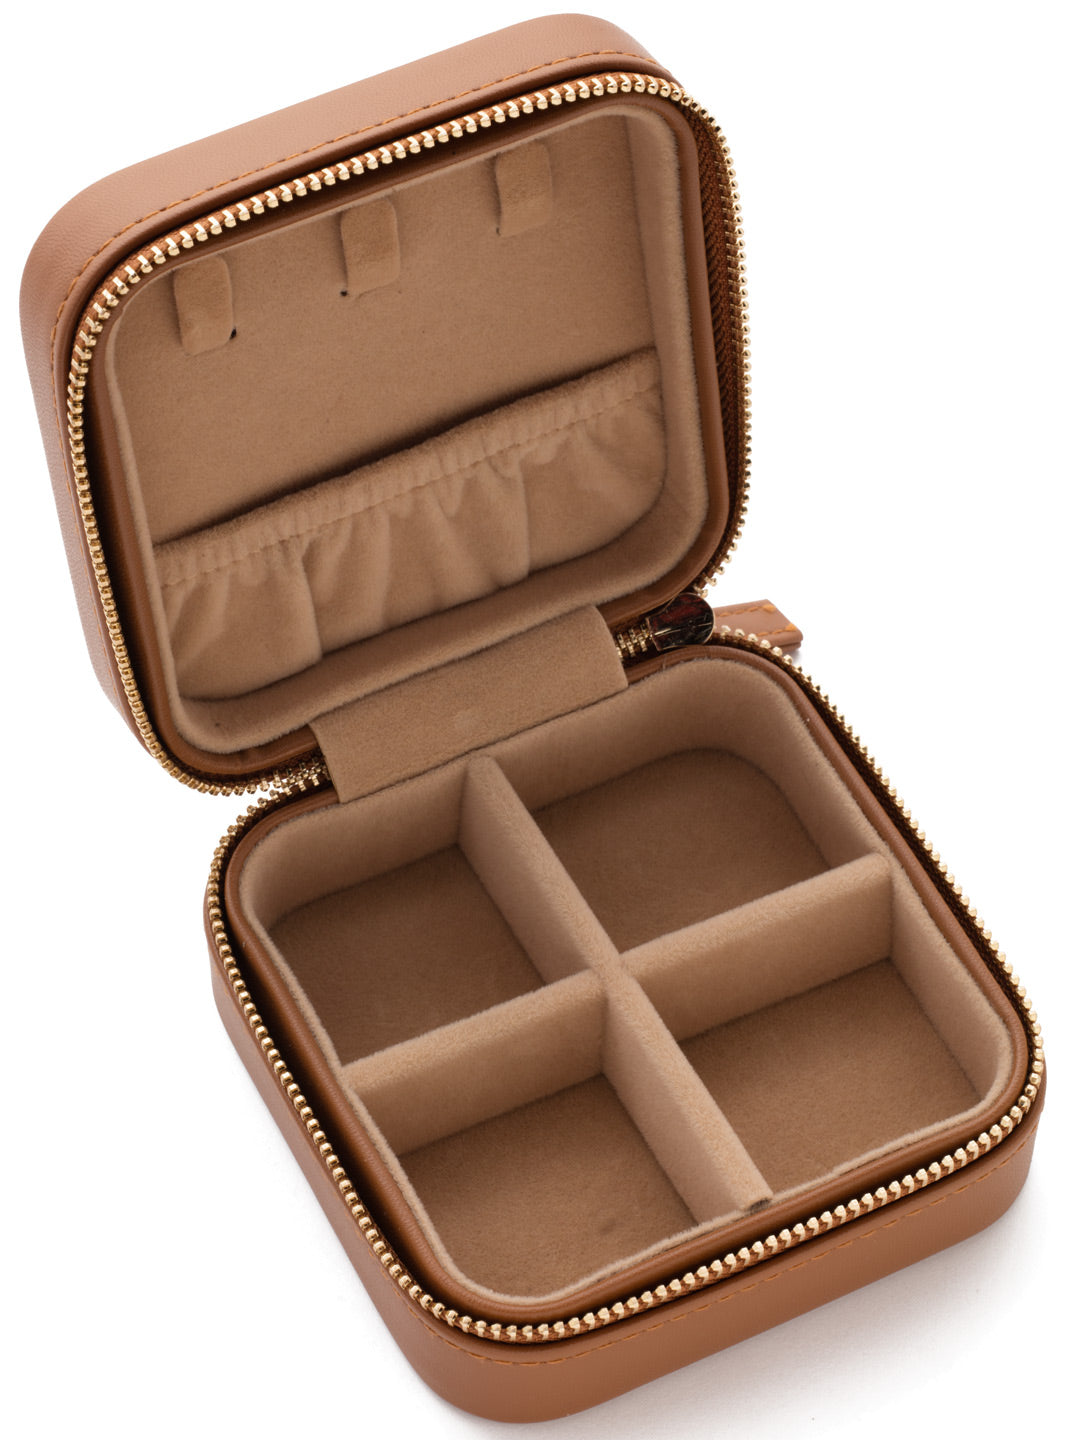 Emerson Jewelry Box - JET1VLCML - A compact travel jewelry box for all your Sorrelli jewelry. Perfect for storing necklaces, earrings, bracelets, and rings when on the go. From Sorrelli's Camel collection.